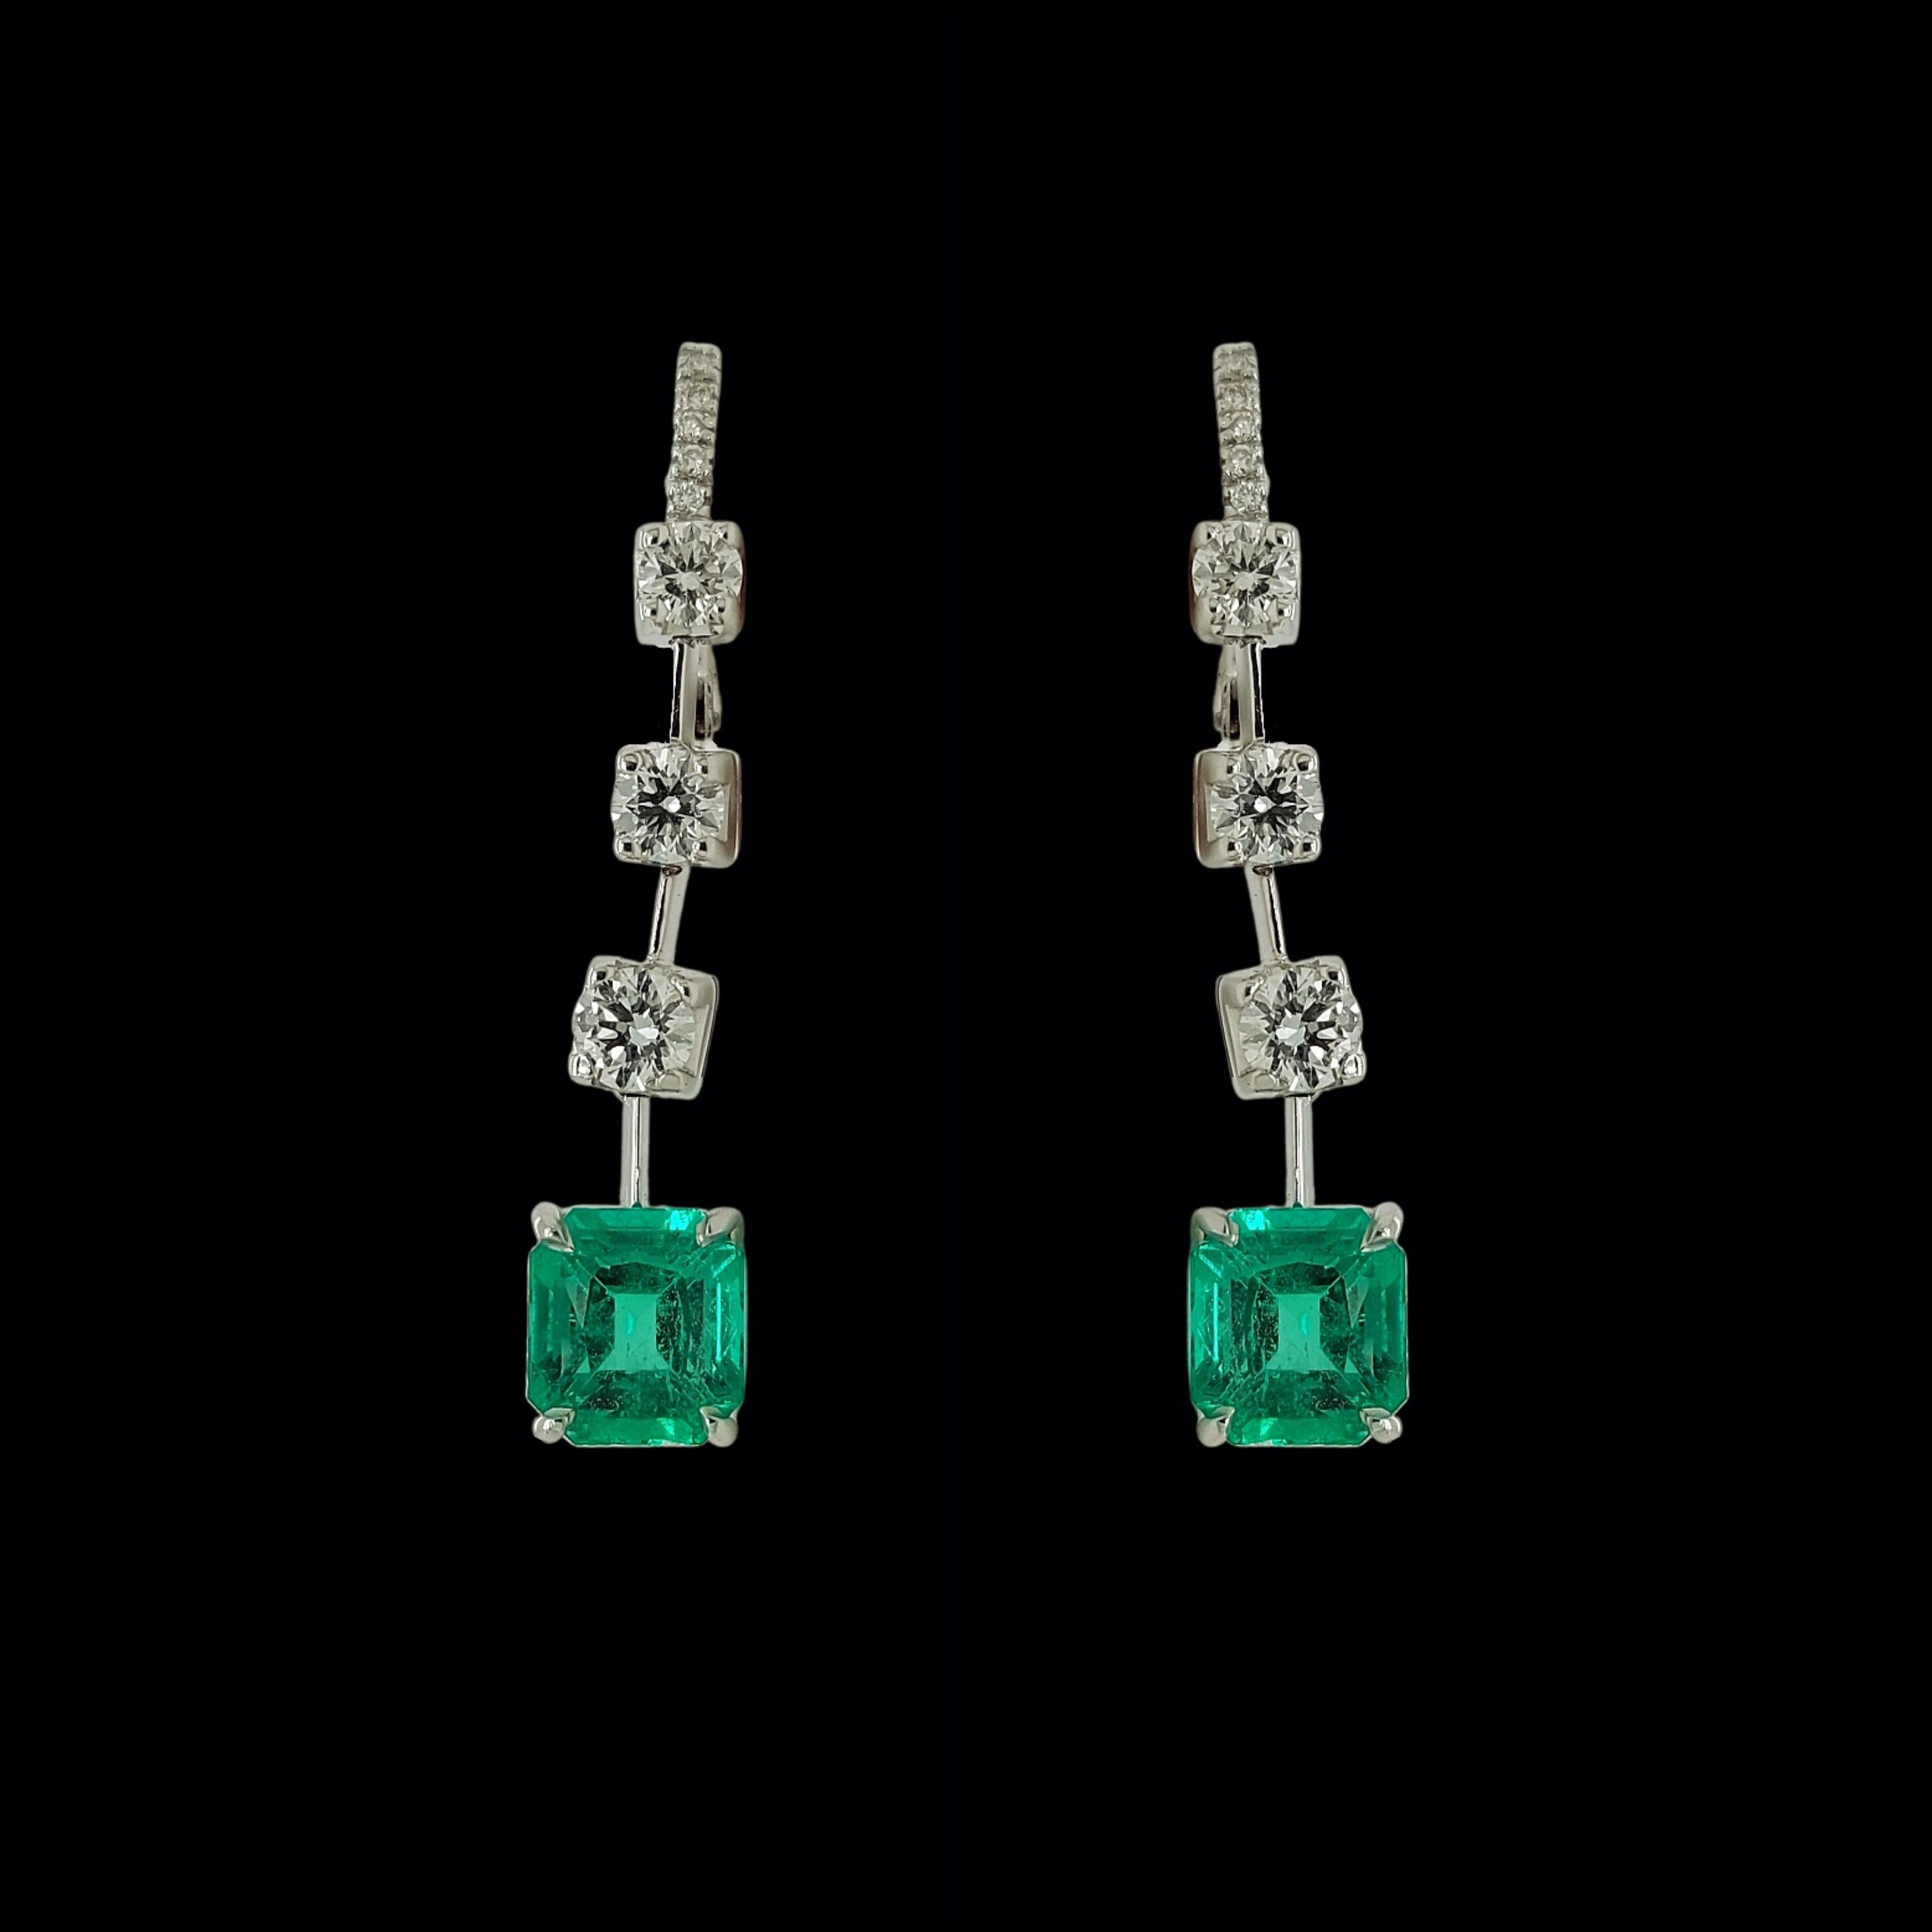 Magnificent Dangling Earrings with 5.29ct Colombian Emerald, 1.51ct Diamonds For Sale 2